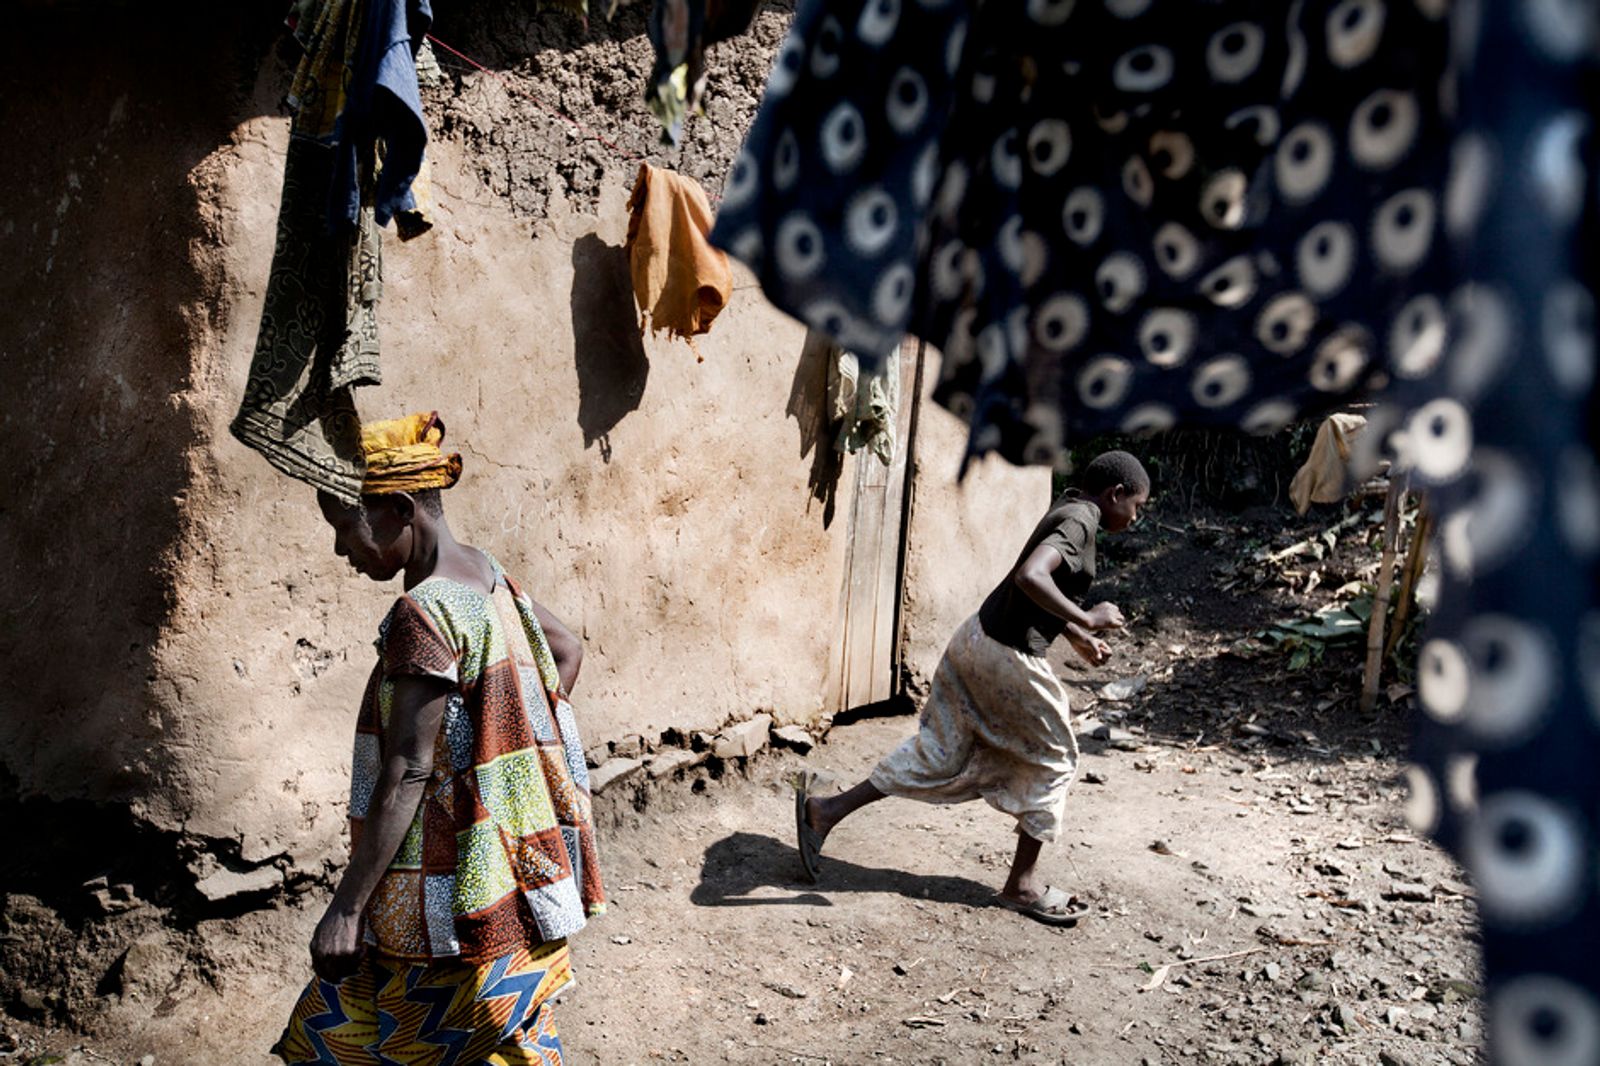 © Annibale Greco - Women victims of sexual violence in Buganga, South Kivu province, DRC, 23 November 2011.